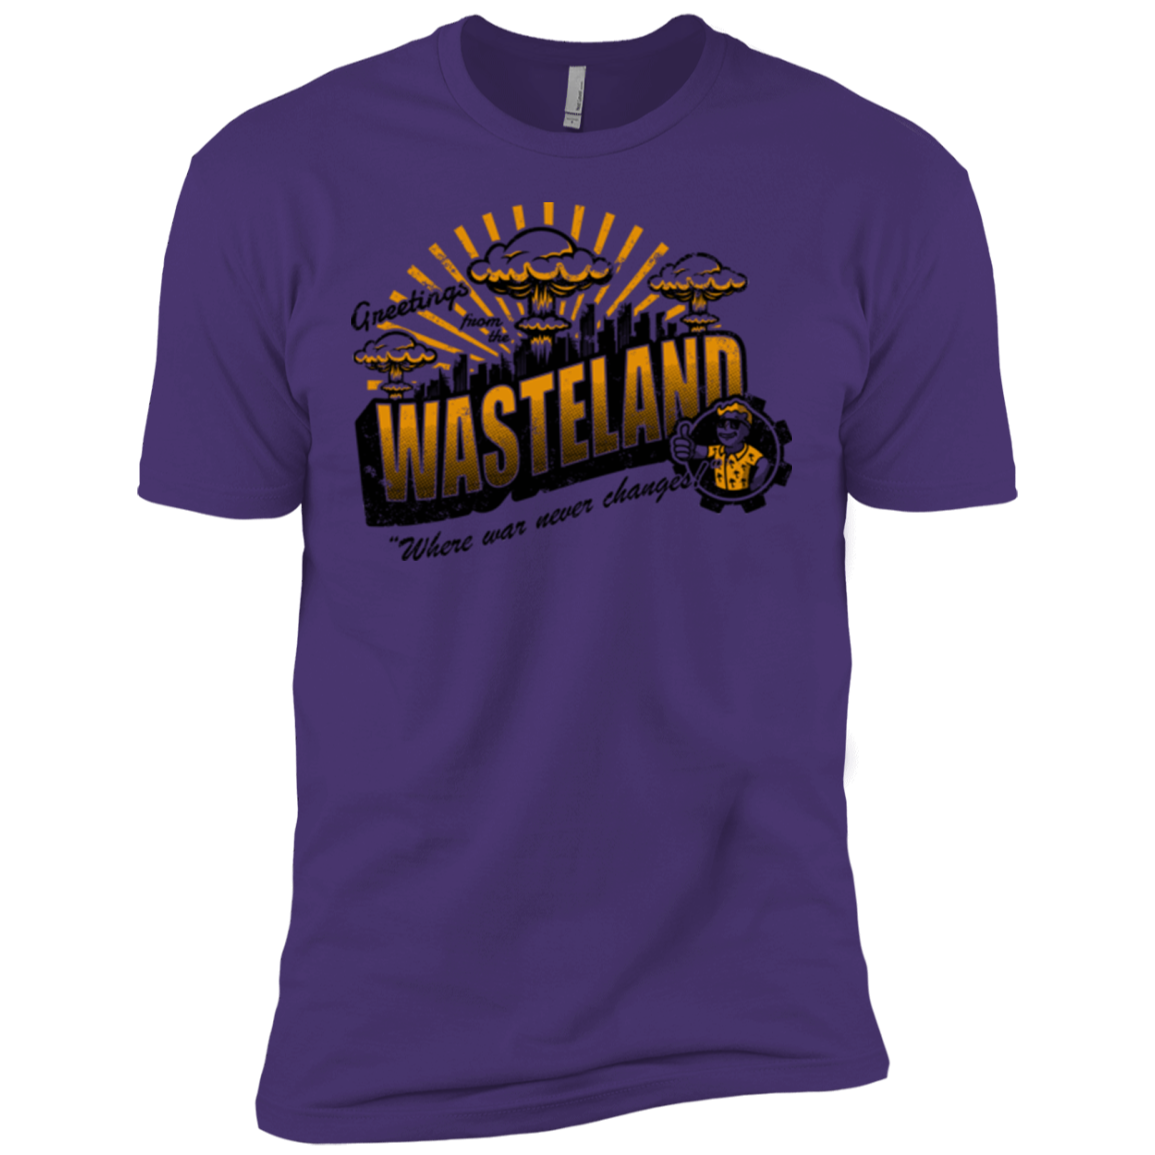 Greetings from the Wasteland! Men's Premium T-Shirt